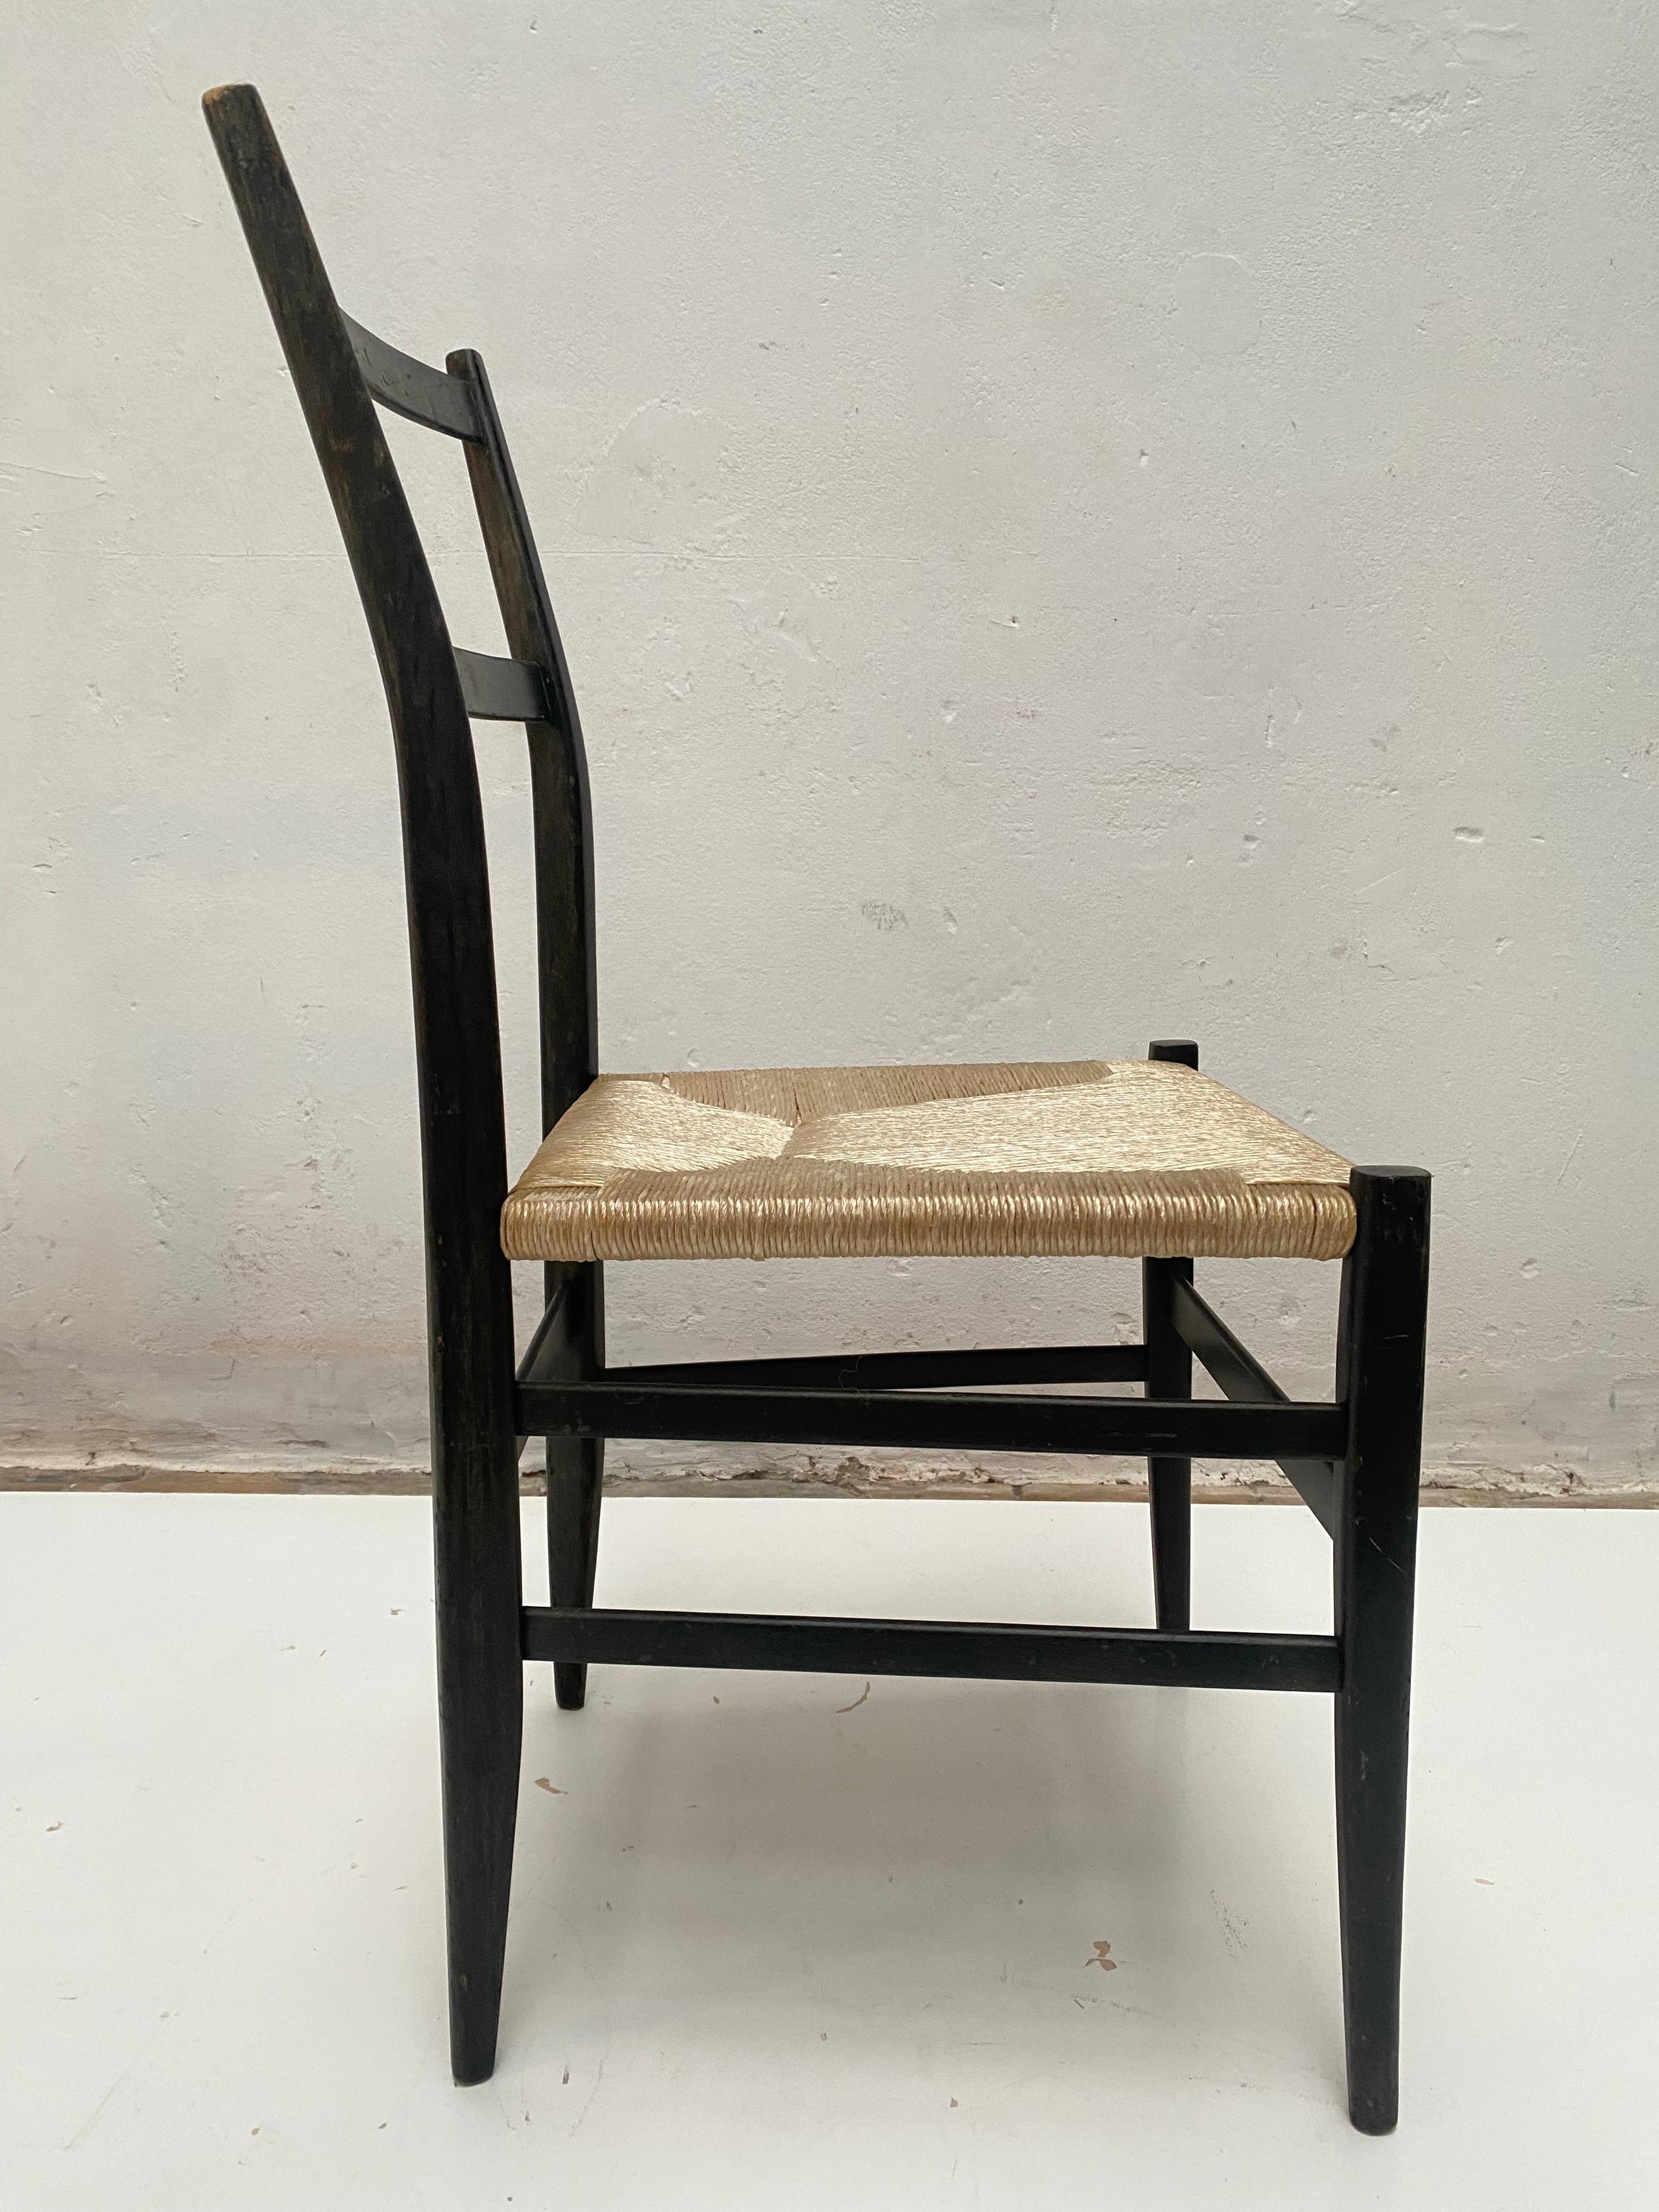 Pair of Leggera Black Ebonized Wooden Dining Chairs by Gio Ponti, Italy, 1950s In Good Condition For Sale In bergen op zoom, NL